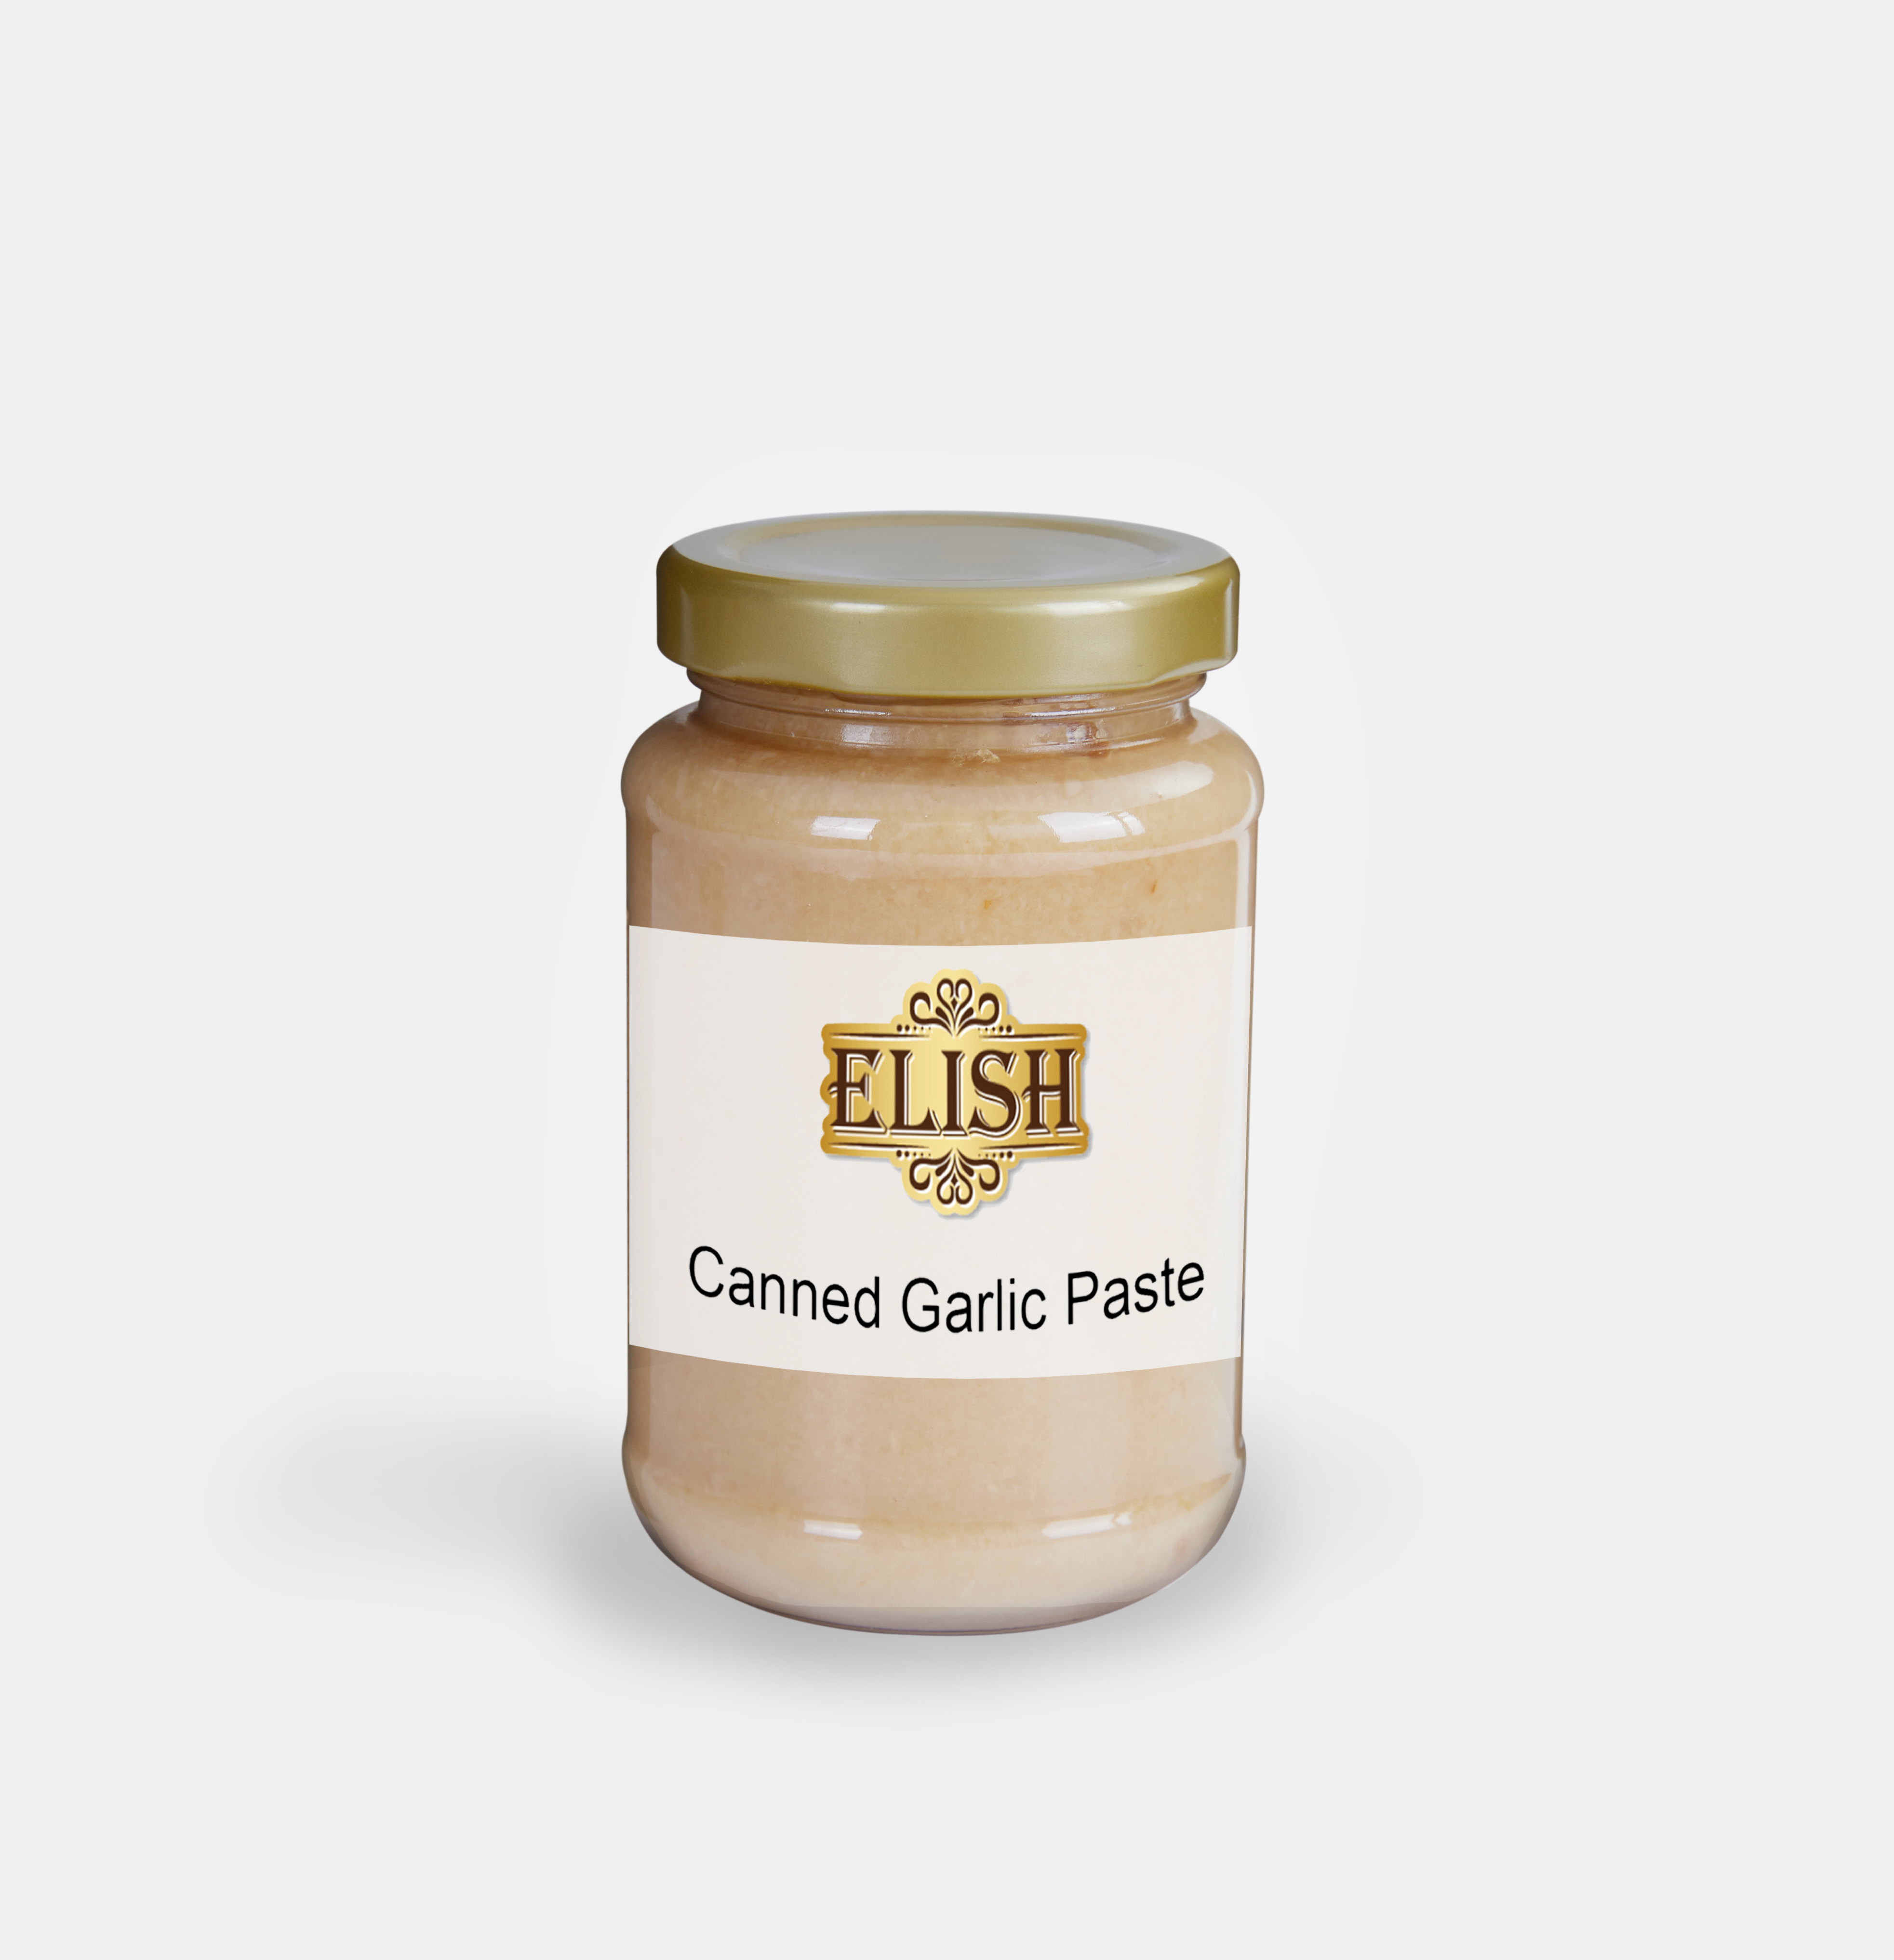 Canned Garlic Paste